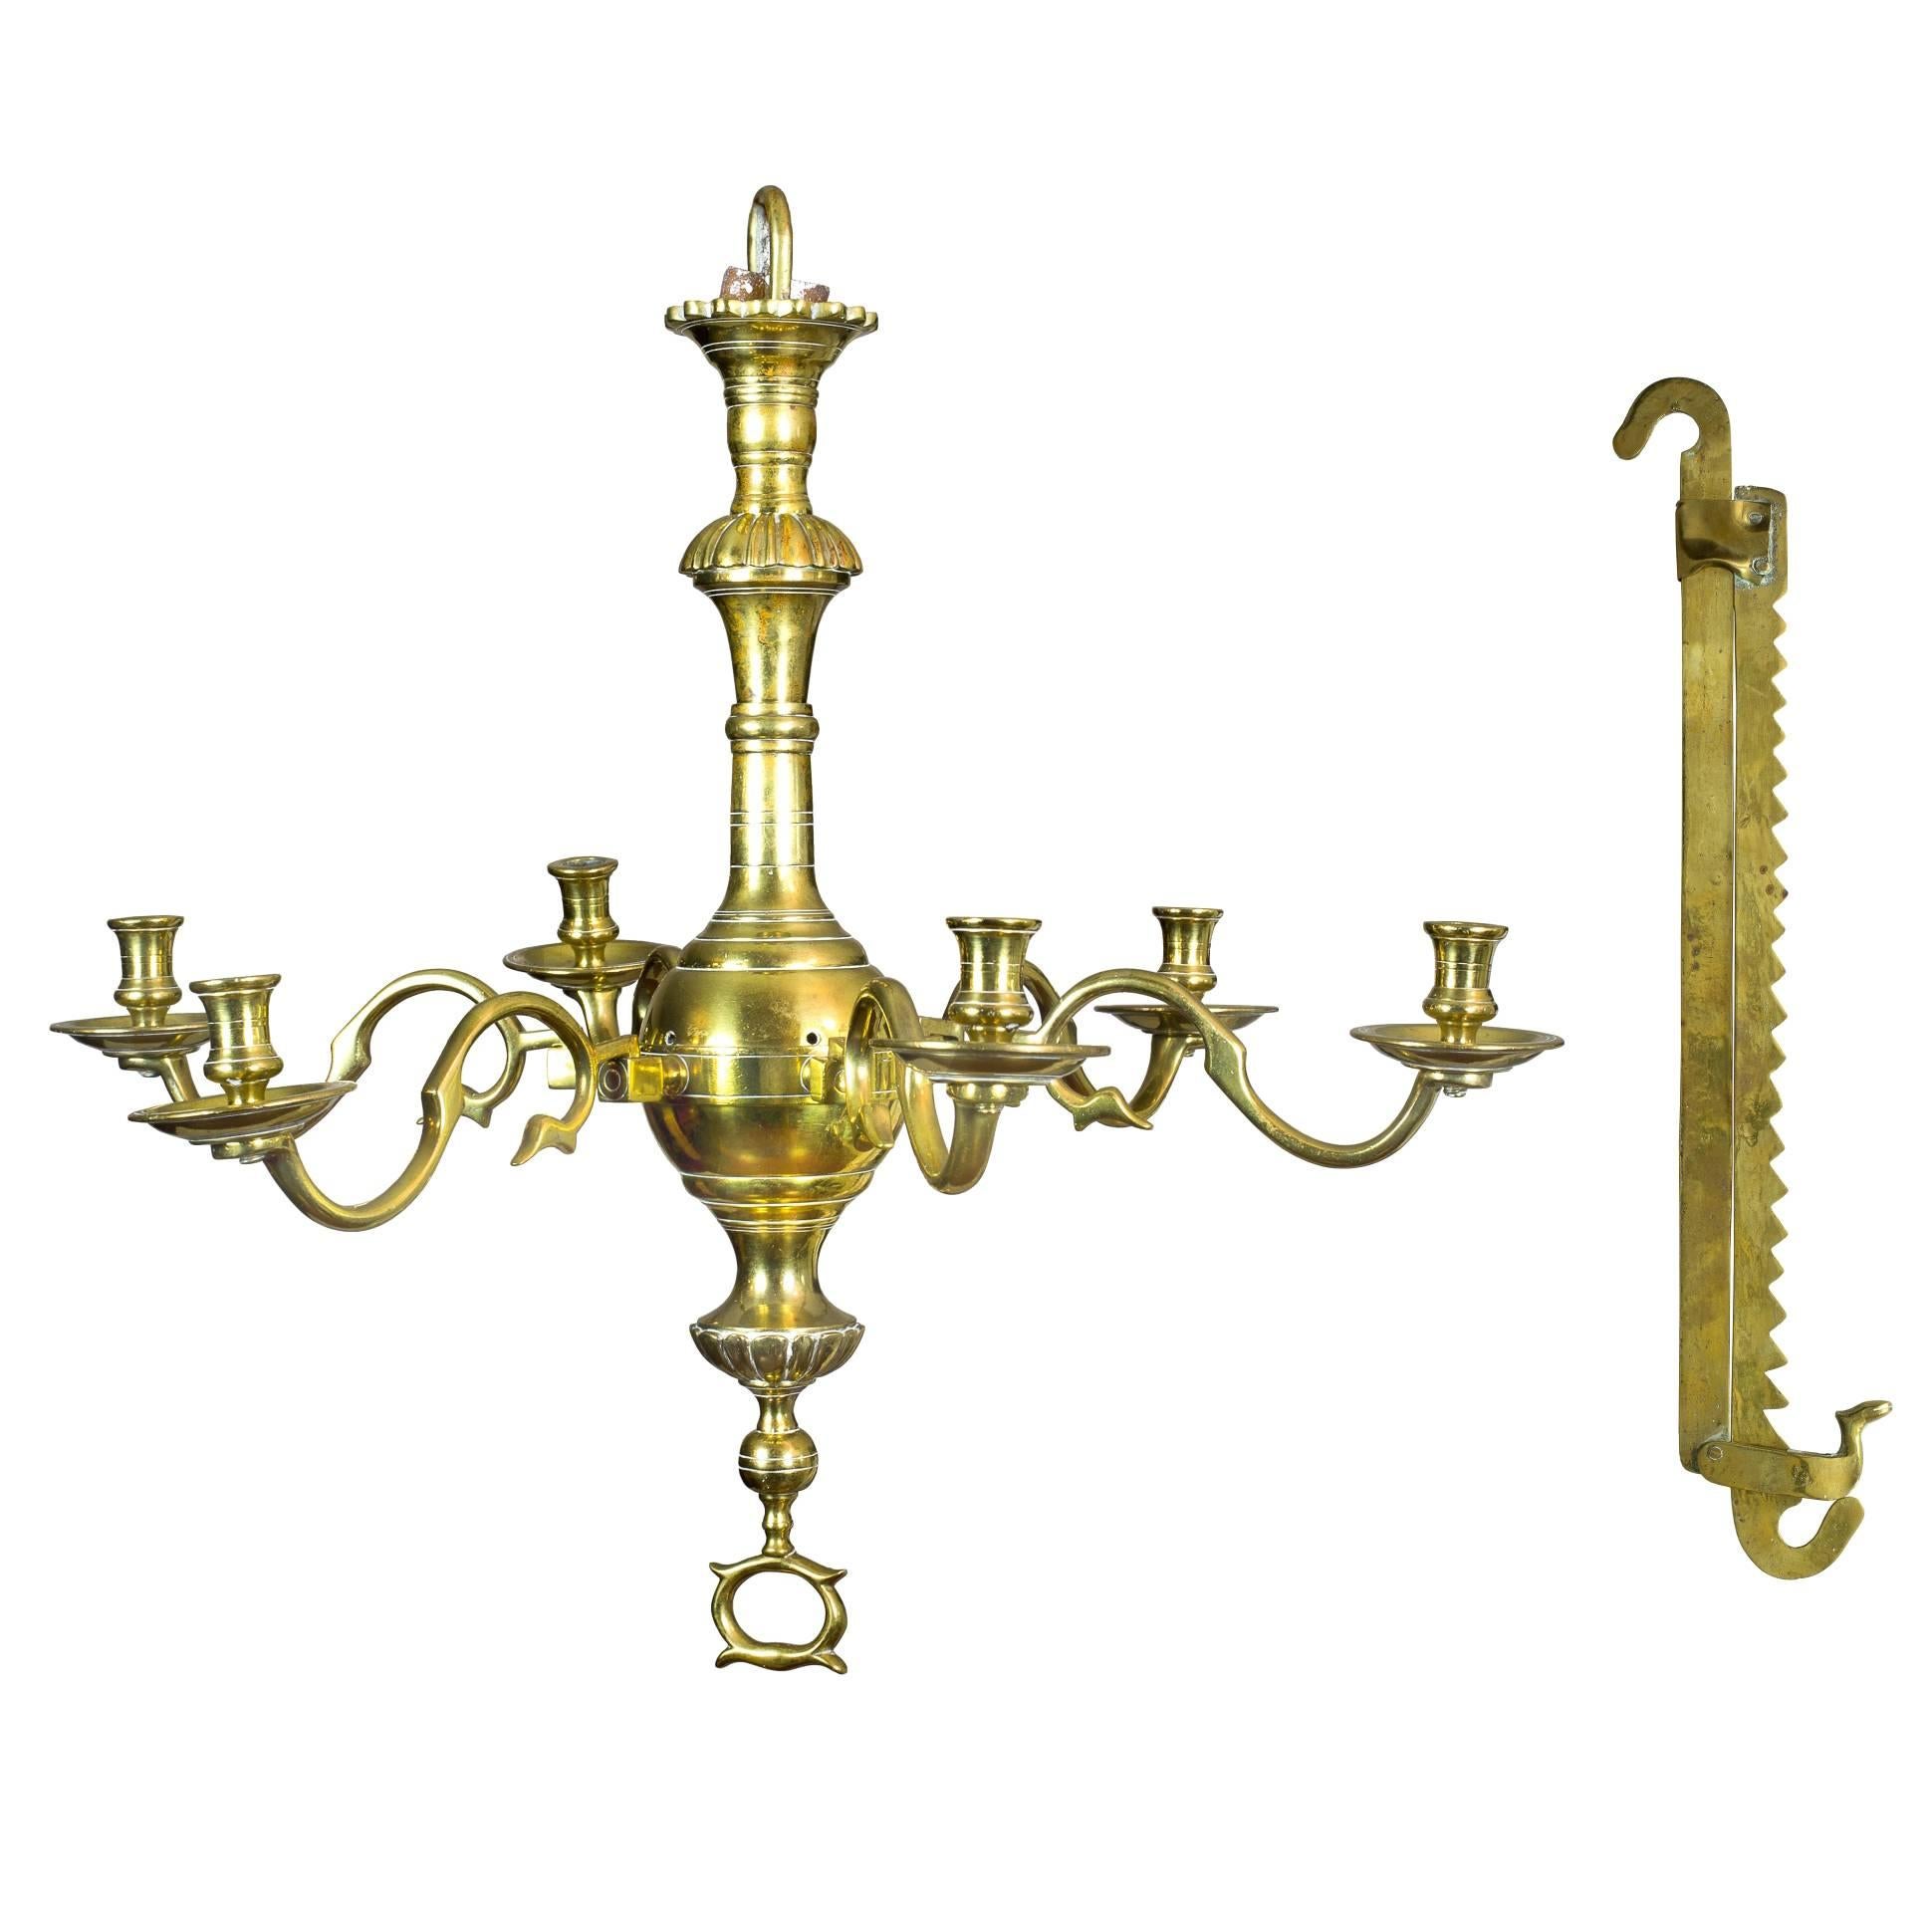 Fine Classic Six-Light English Brass Chandelier with Trammel, Both, circa 1750 For Sale